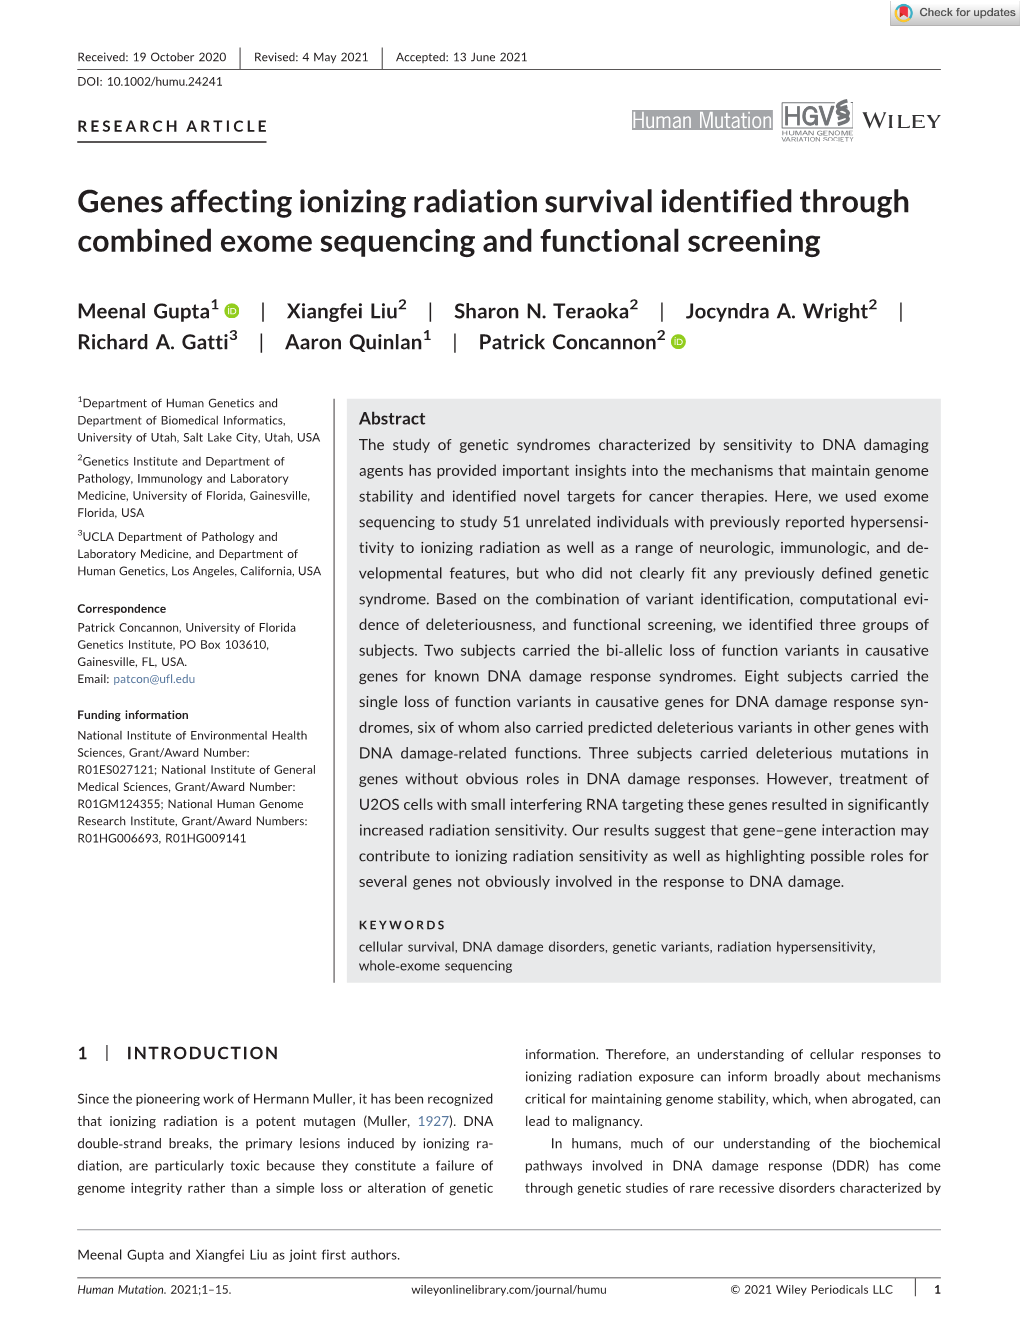 Genes Affecting Ionizing Radiation Survival Identified Through Combined Exome Sequencing and Functional Screening